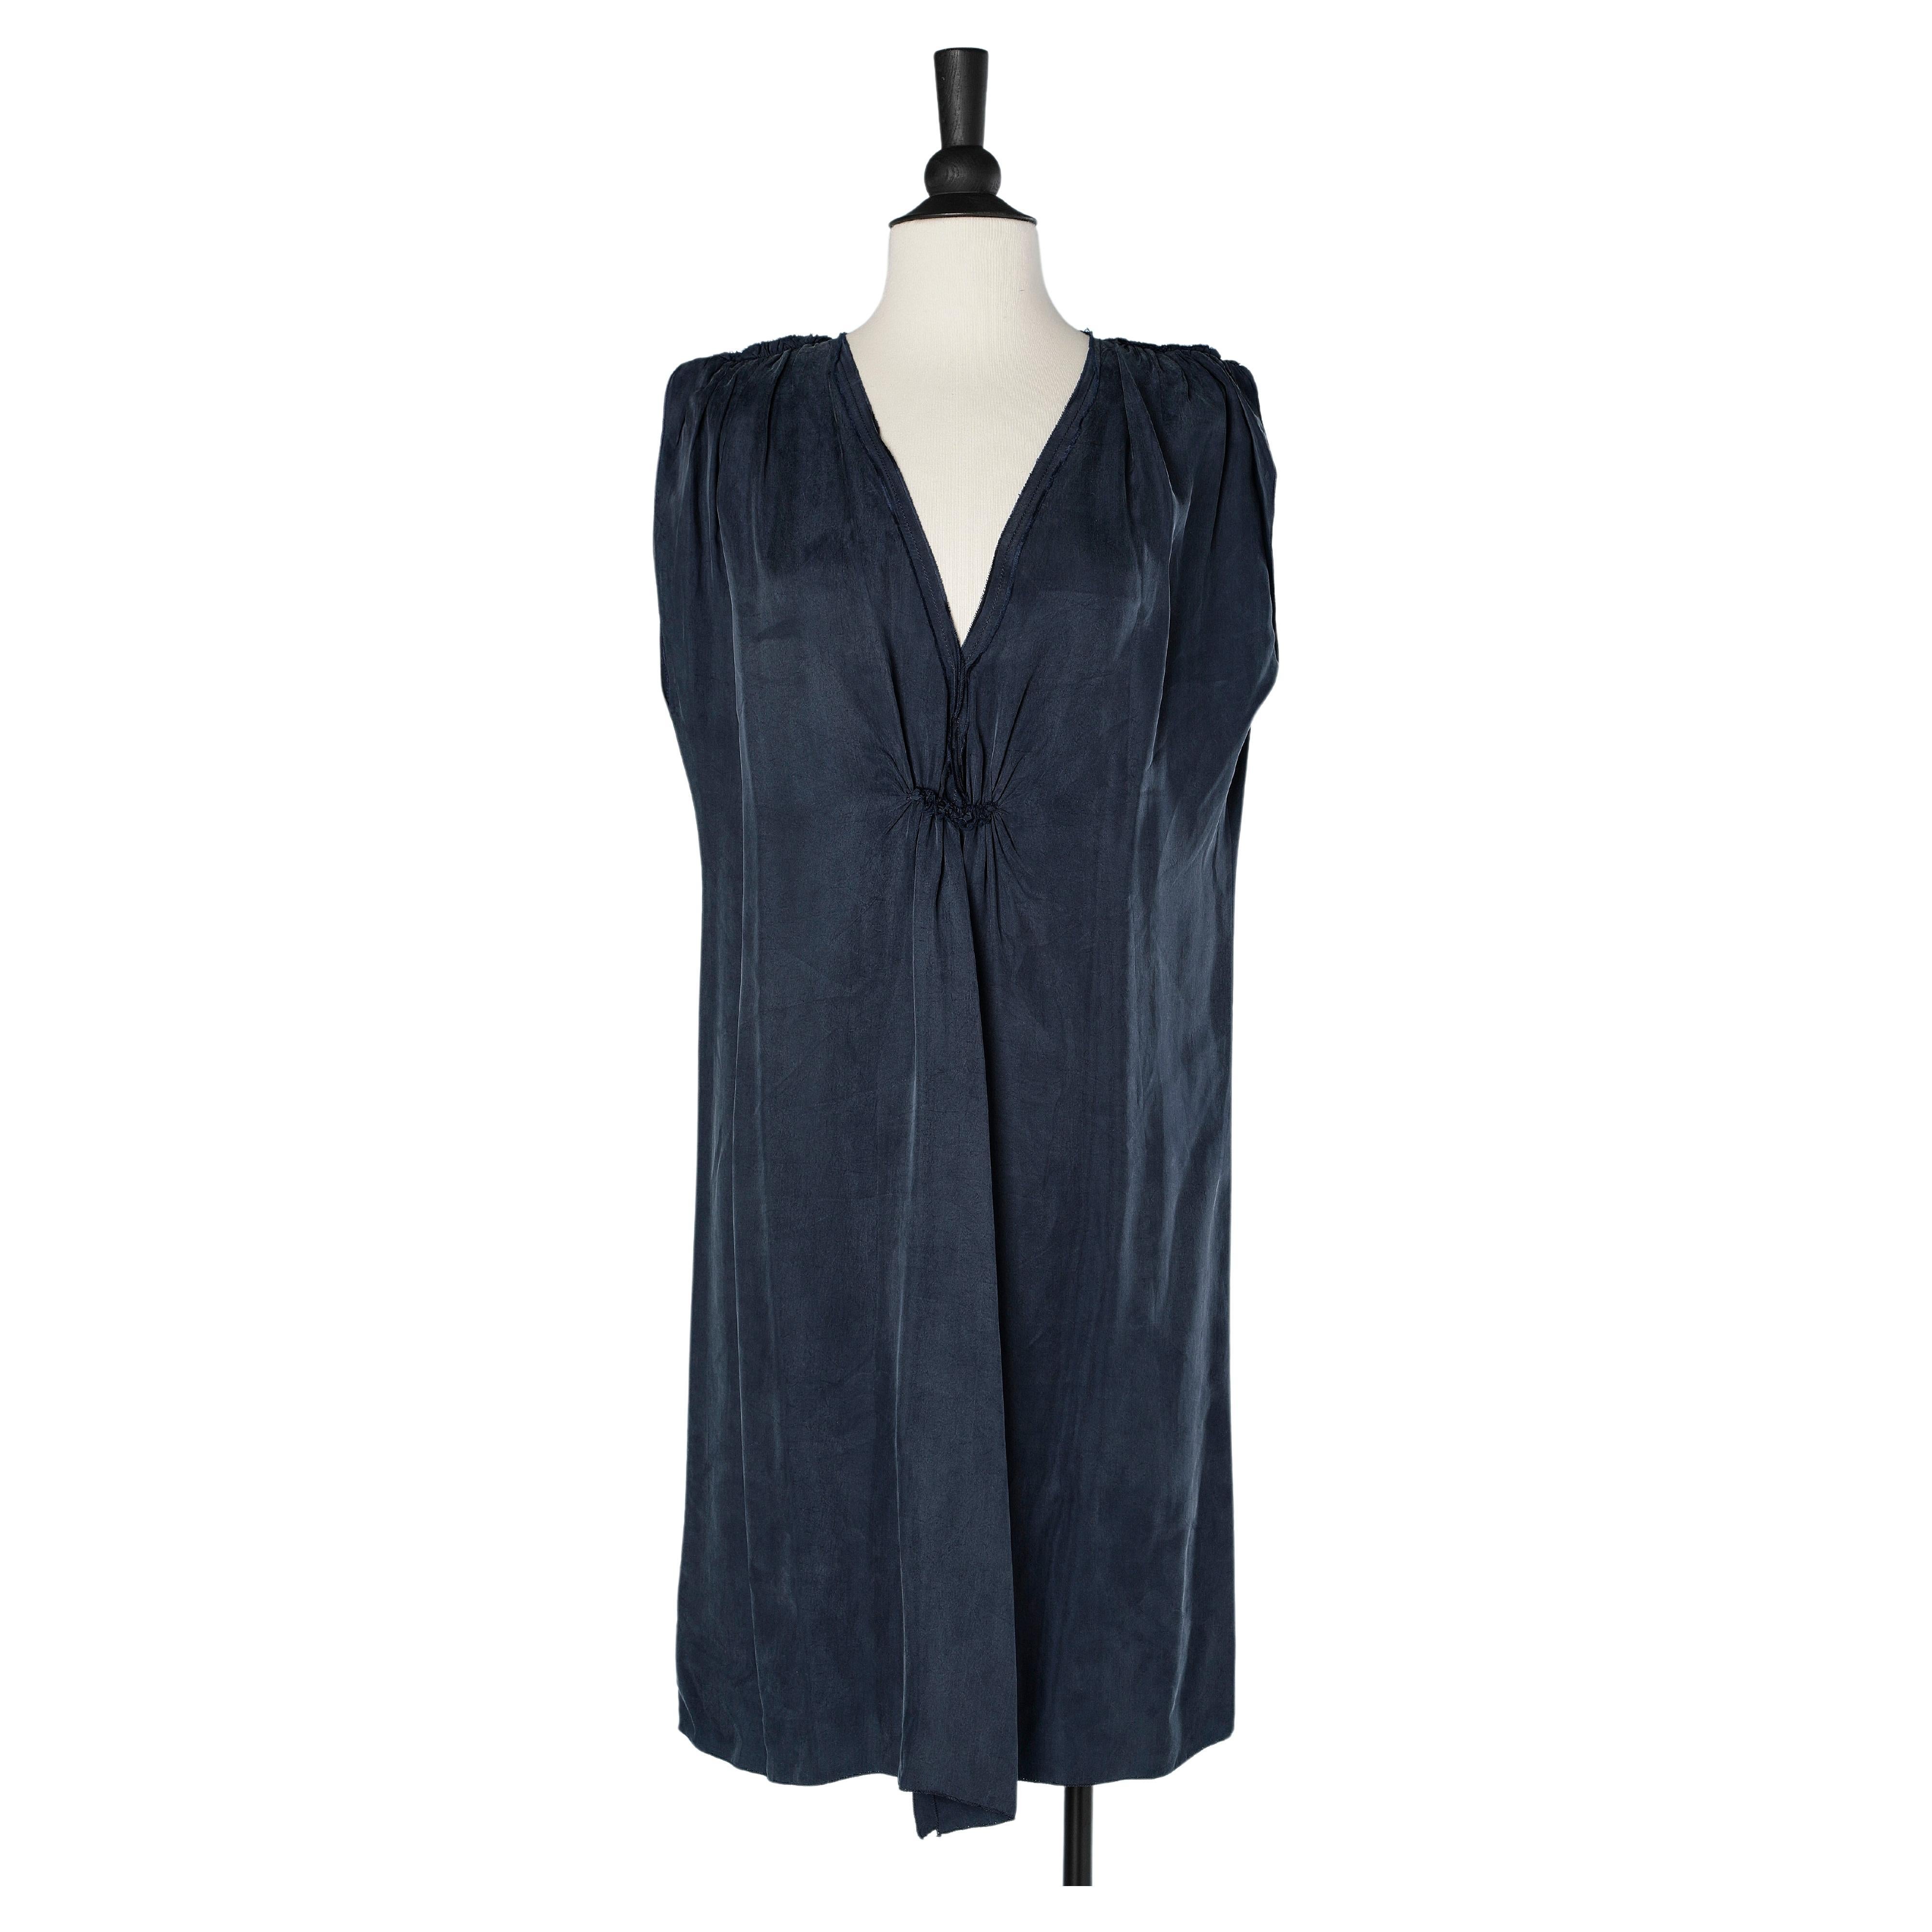 Navy blue row cut dress draped in the middle front Lanvin by Alber Elbaz